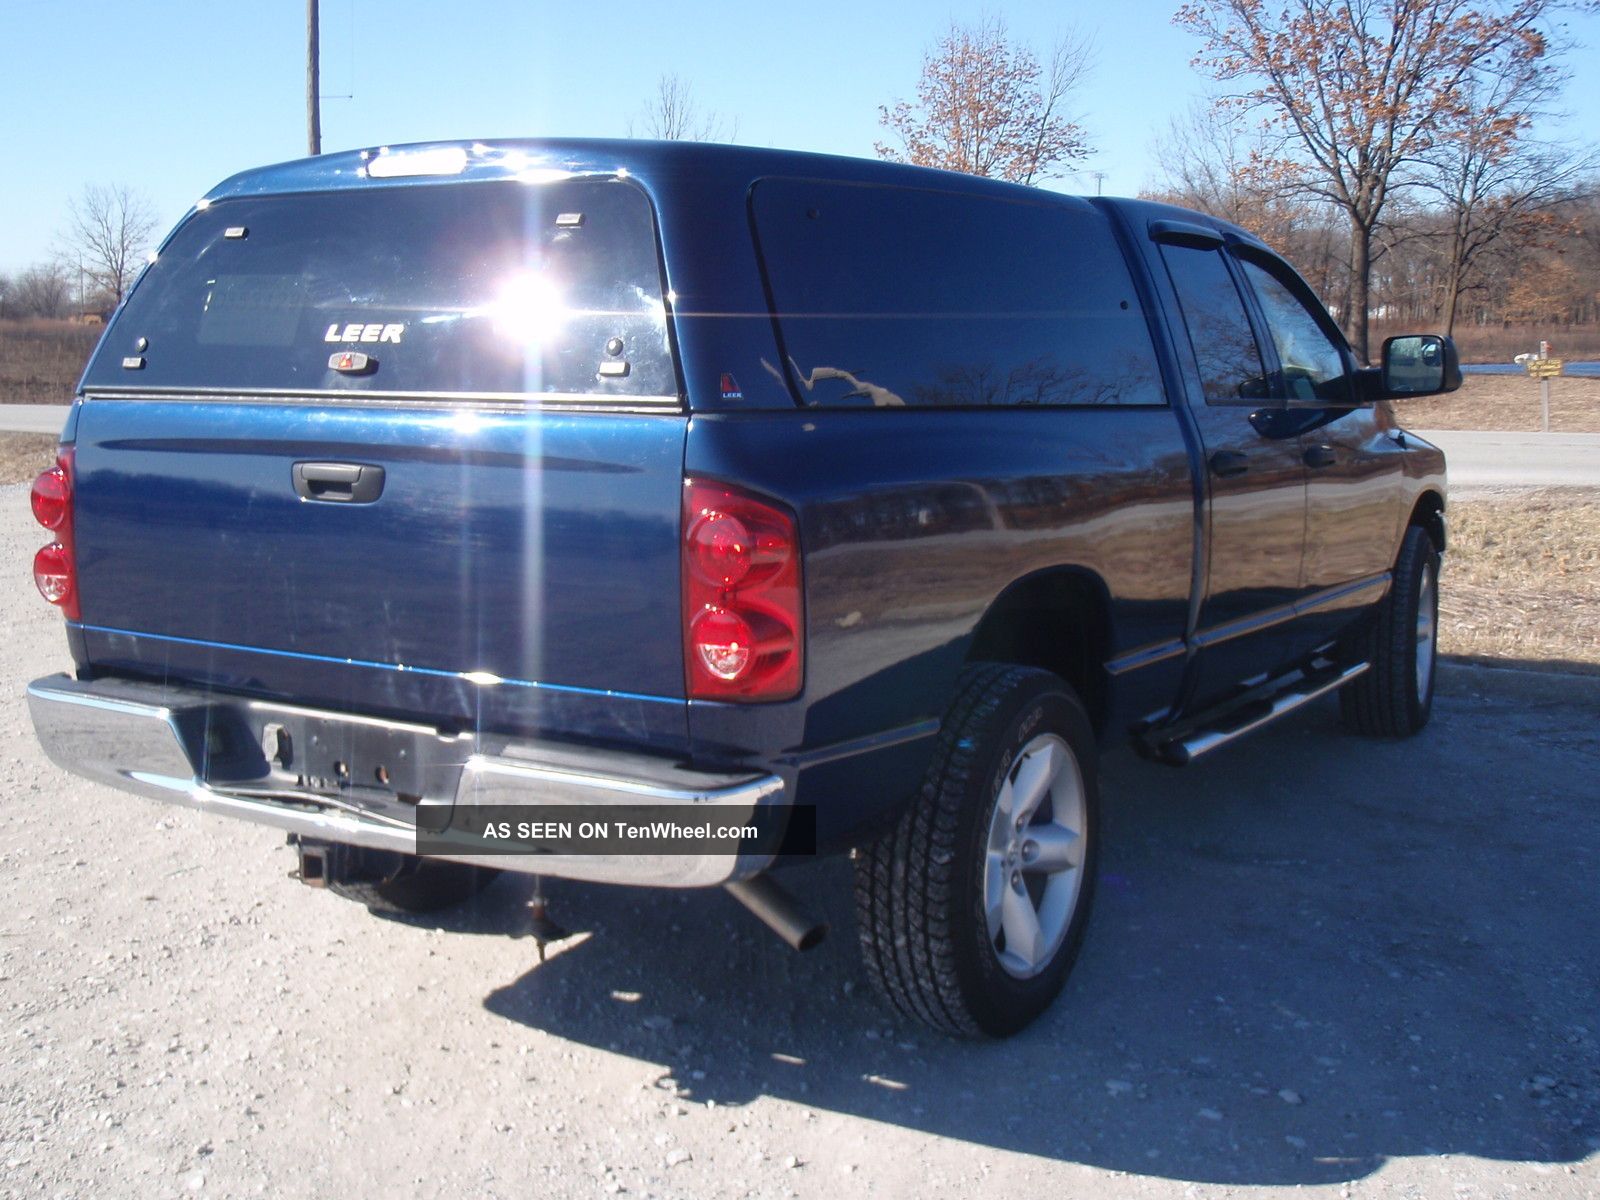 2007 Dodge Ram 1500 St 4x4 Short Bed Quad Cab / Tow Package 2007 Dodge Ram 1500 4x4 Towing Capacity